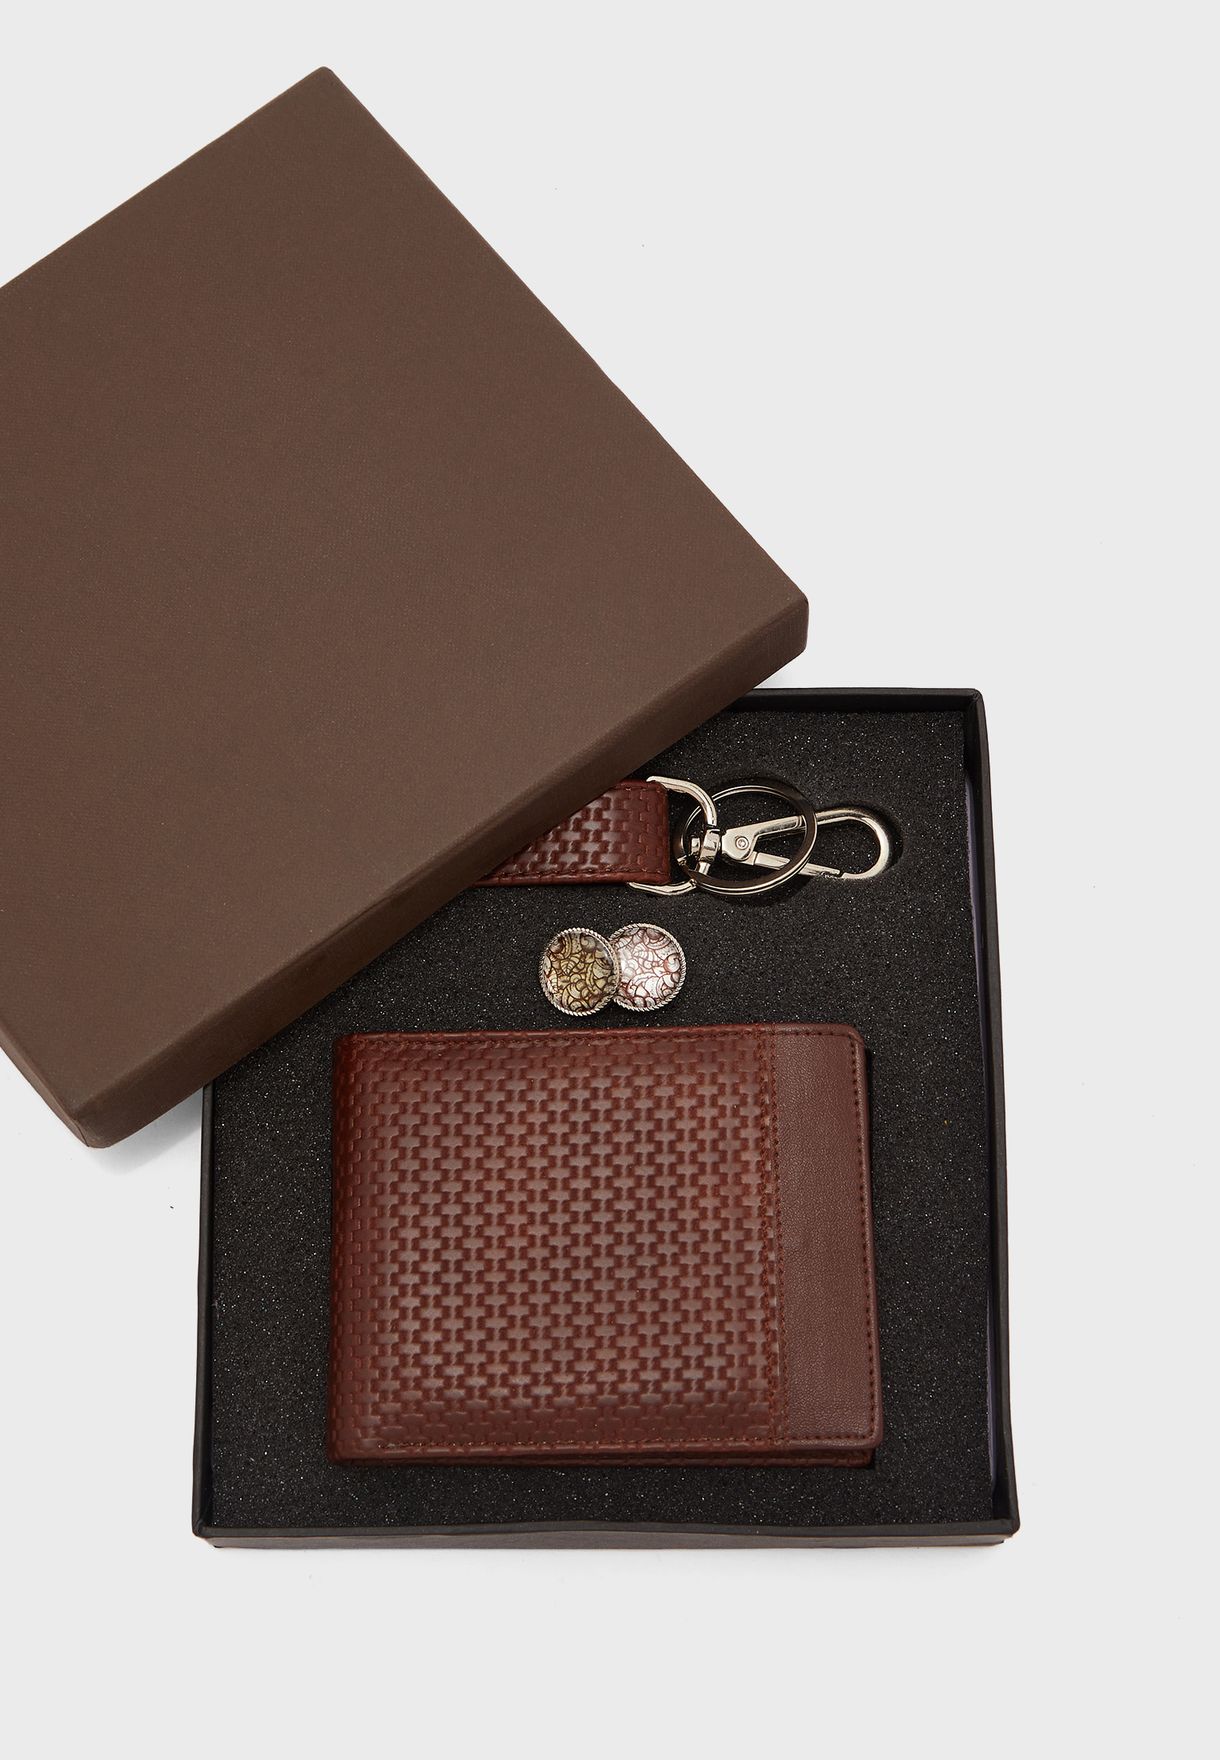 Wallet, Key Chain And Cuff Link Gifting Set